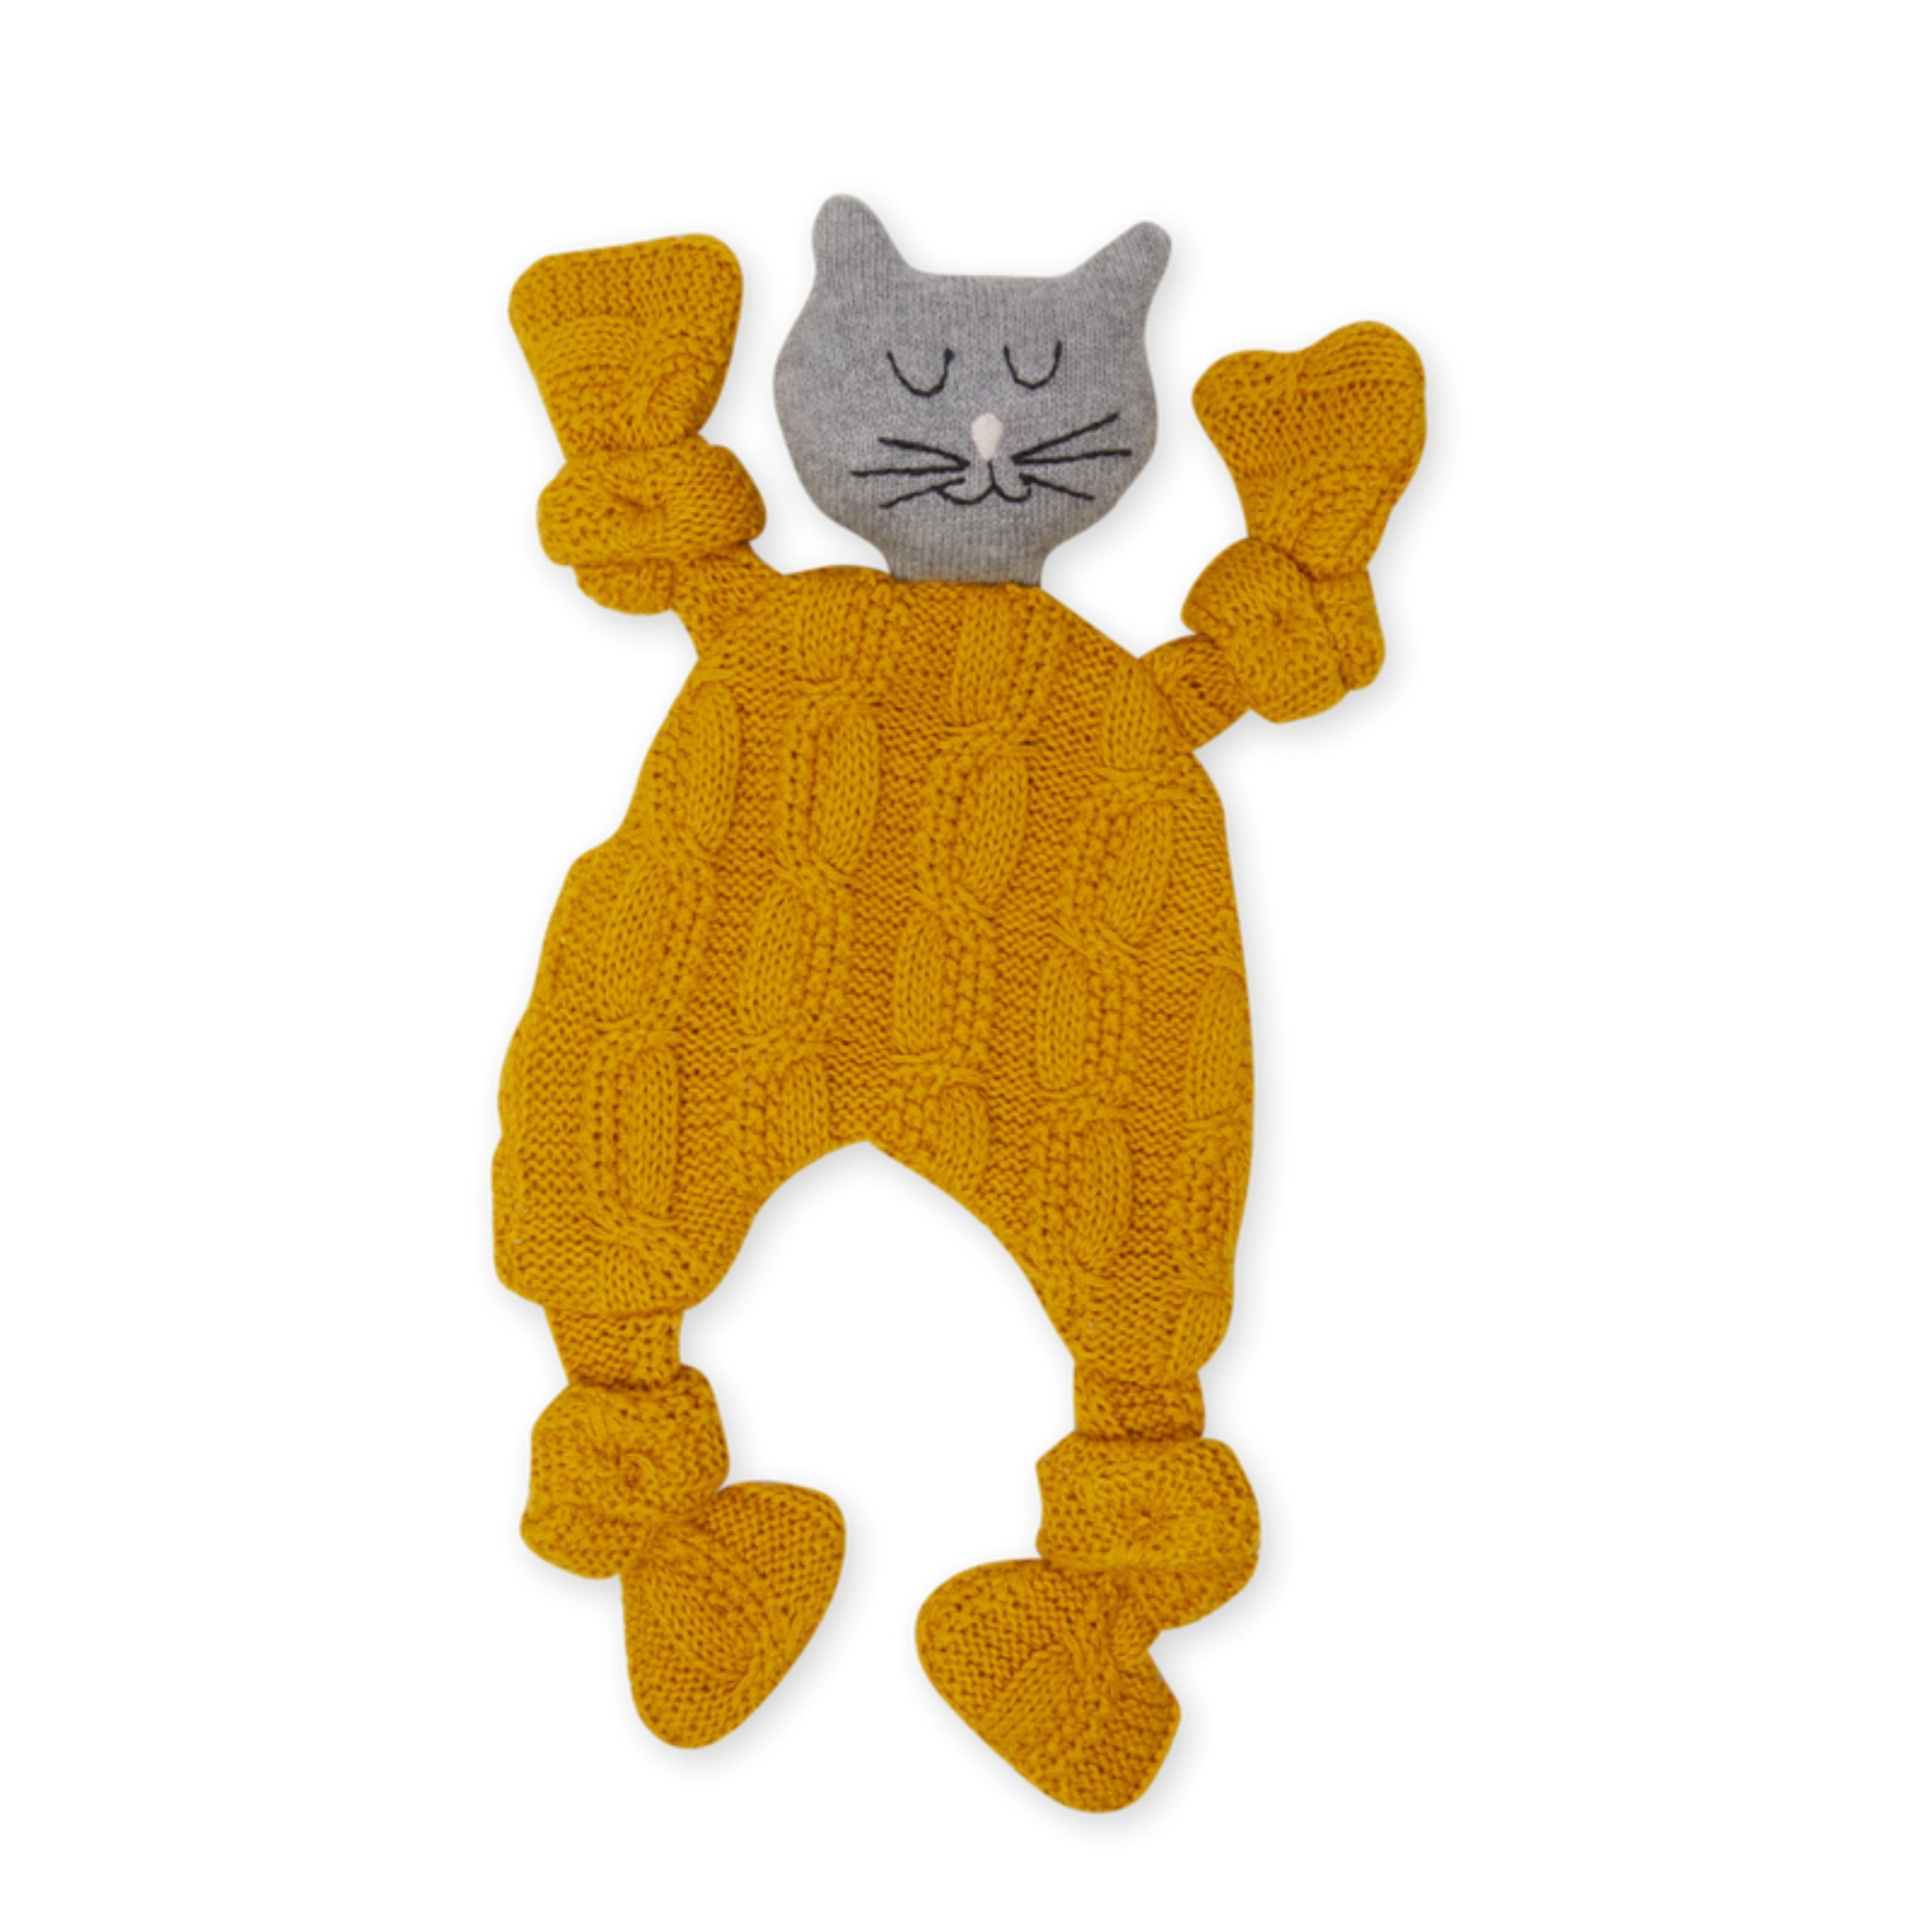 A deep yellow soft knitted comforter toy with a cat head design